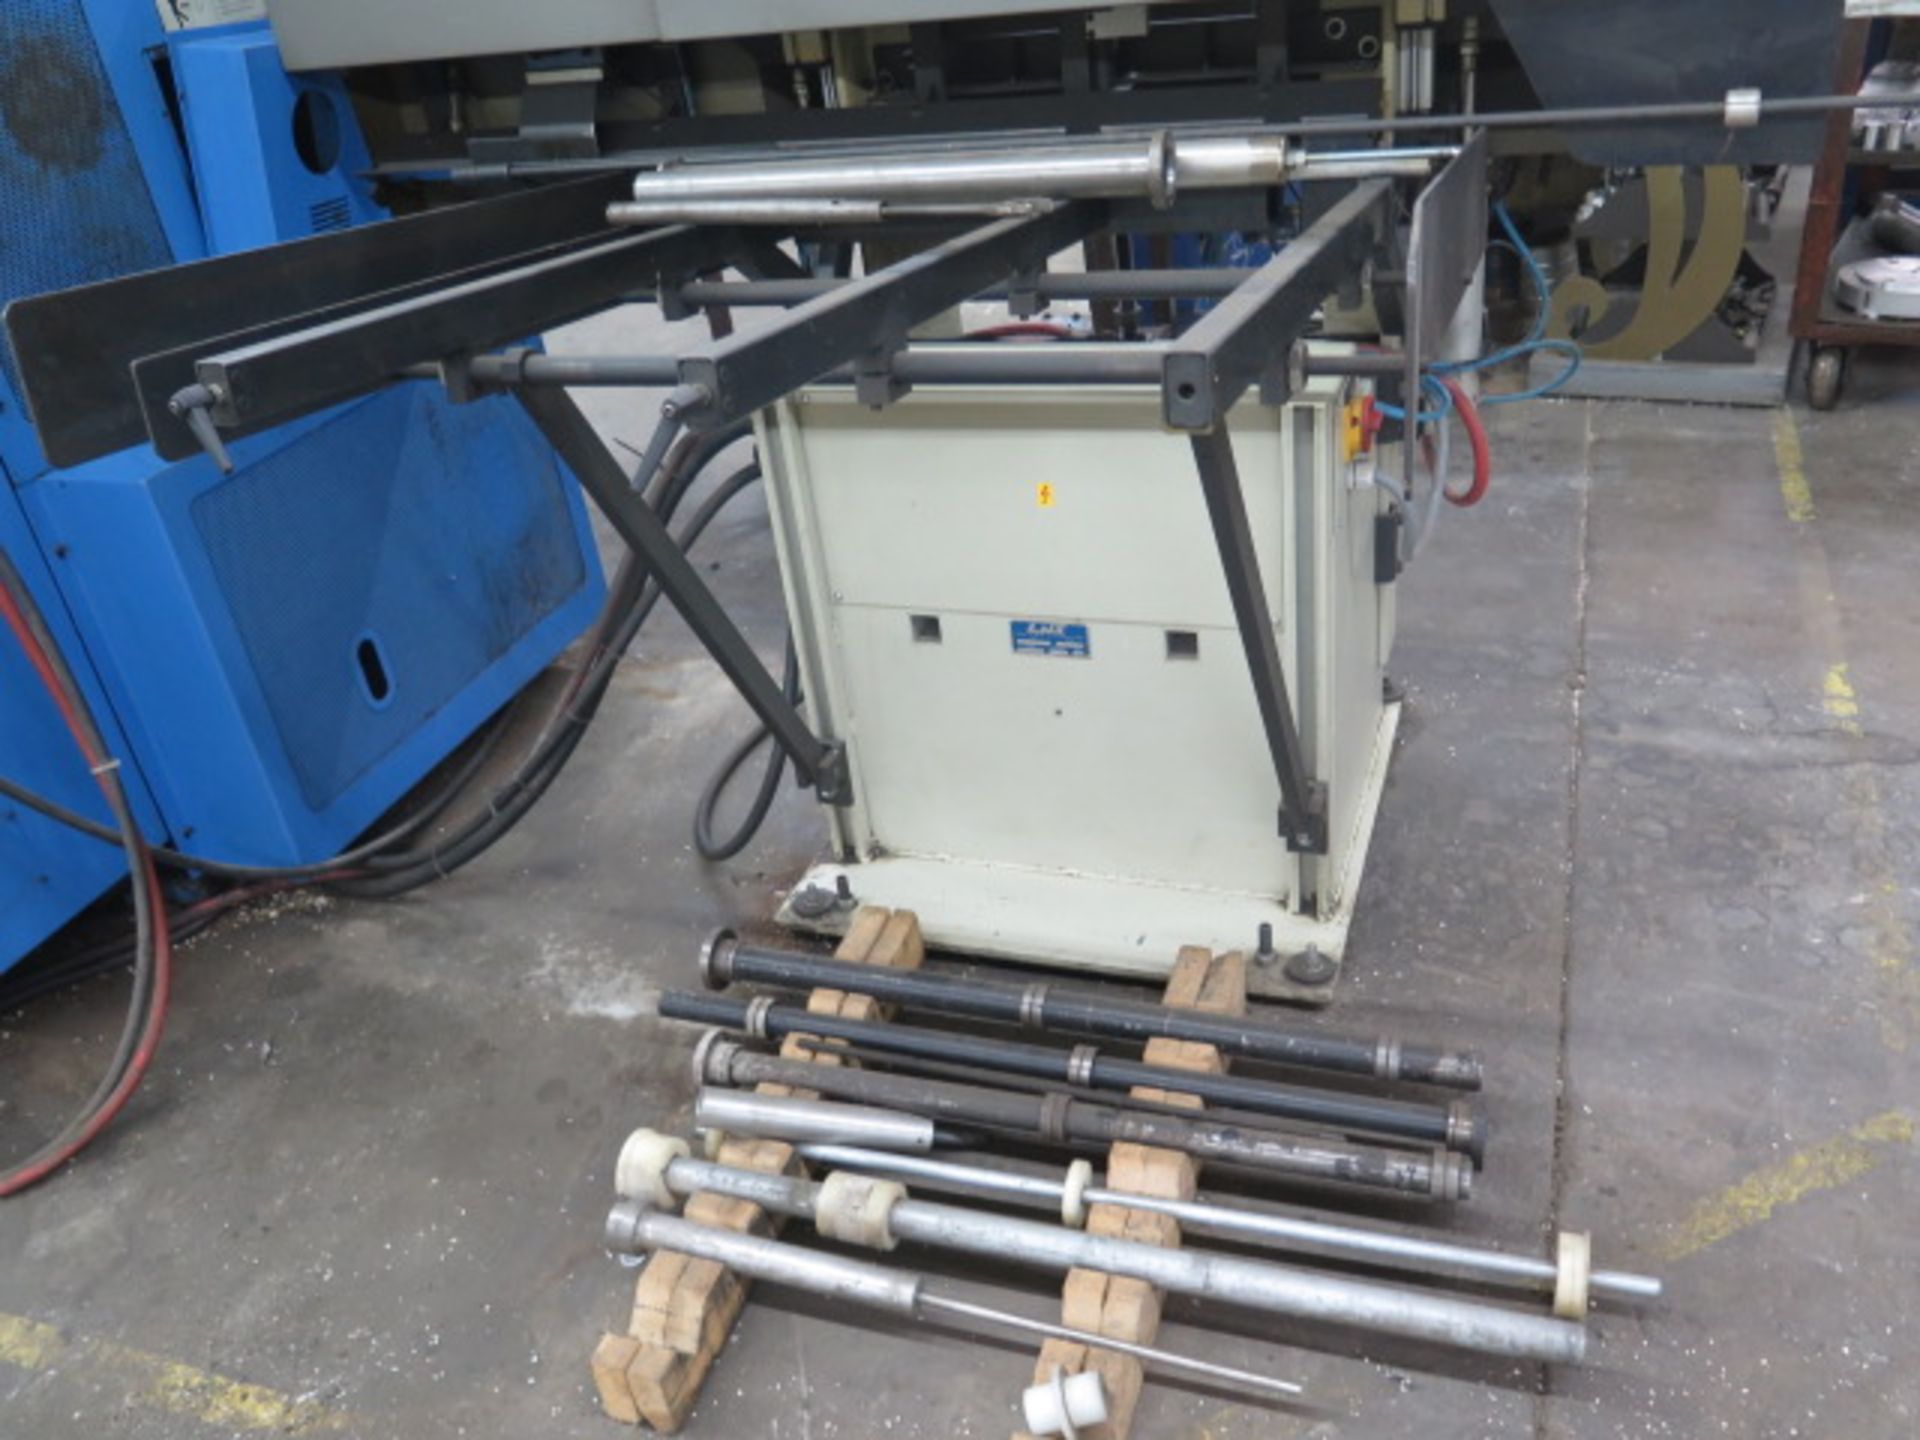 LNS Automatic Bar Loader / Feeder (SOLD AS-IS - NO WARRANTY) - Image 5 of 7